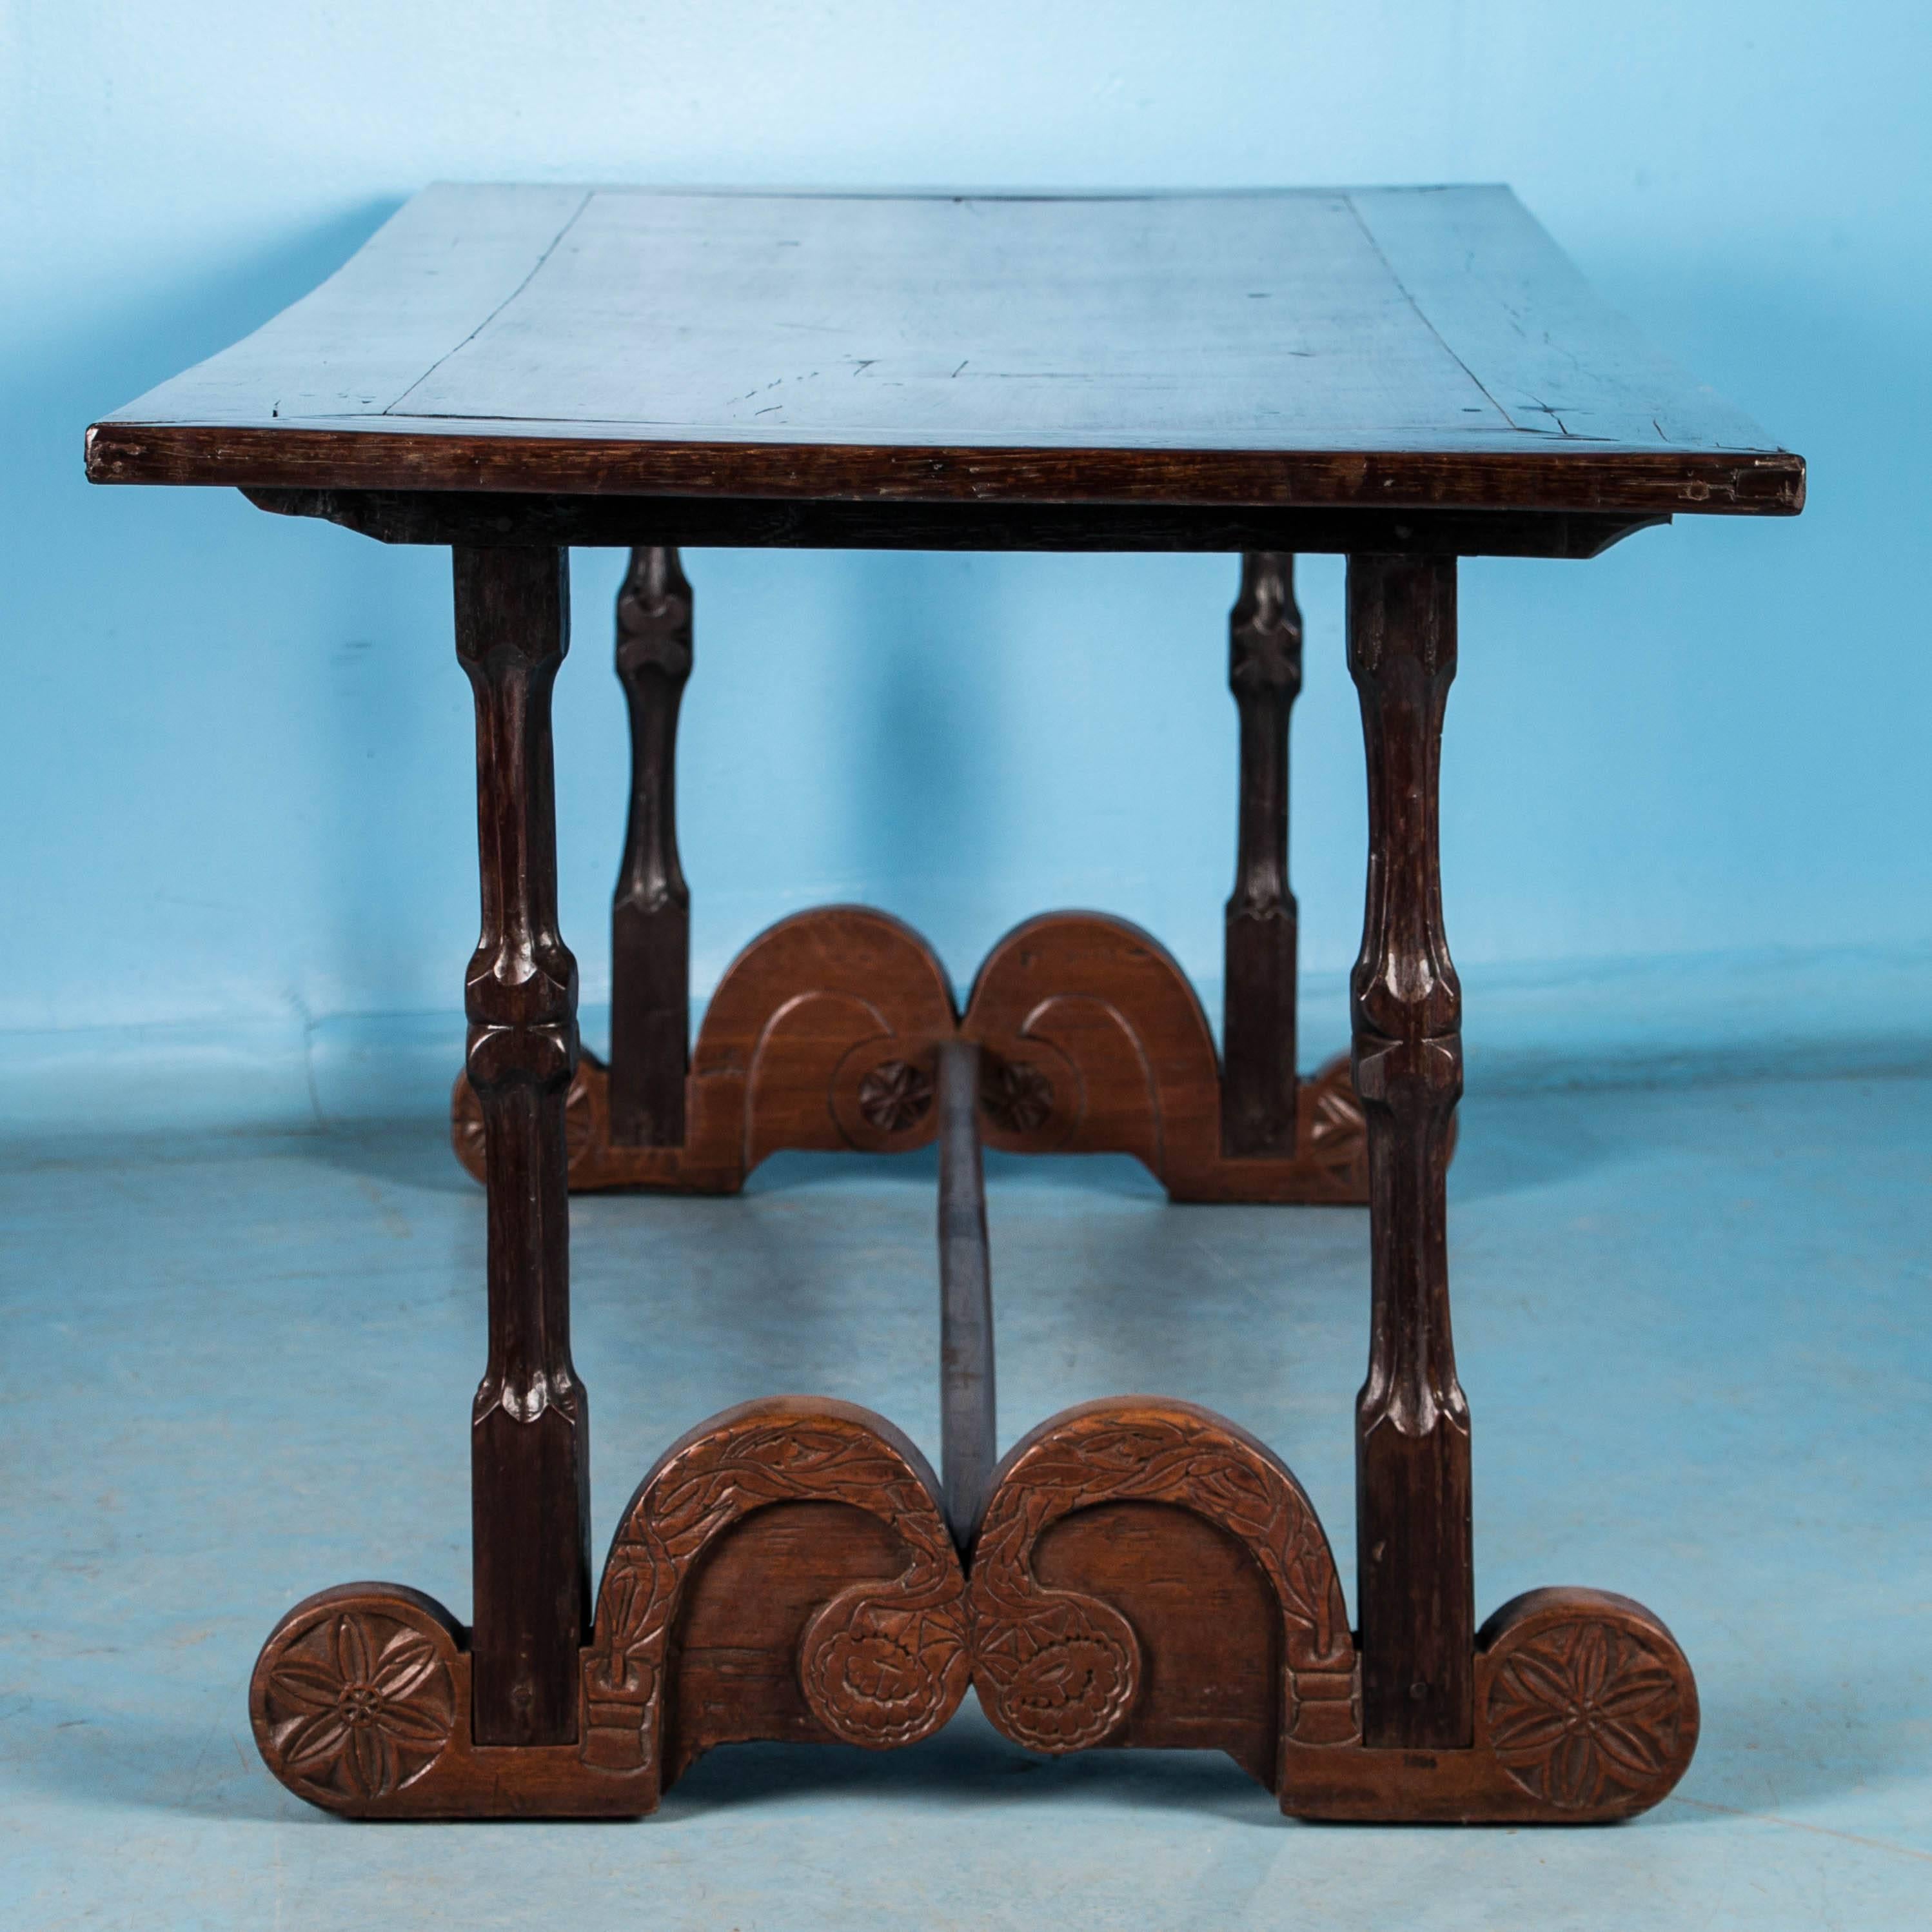 Blending craftsmanship and design, this long handcrafted table is stunning with it's contrasting light and dark hard wood top, sculpted legs and heavily carved scrolled feet. Made from endemic Philippine hardwoods, possibly molave and narra wood,